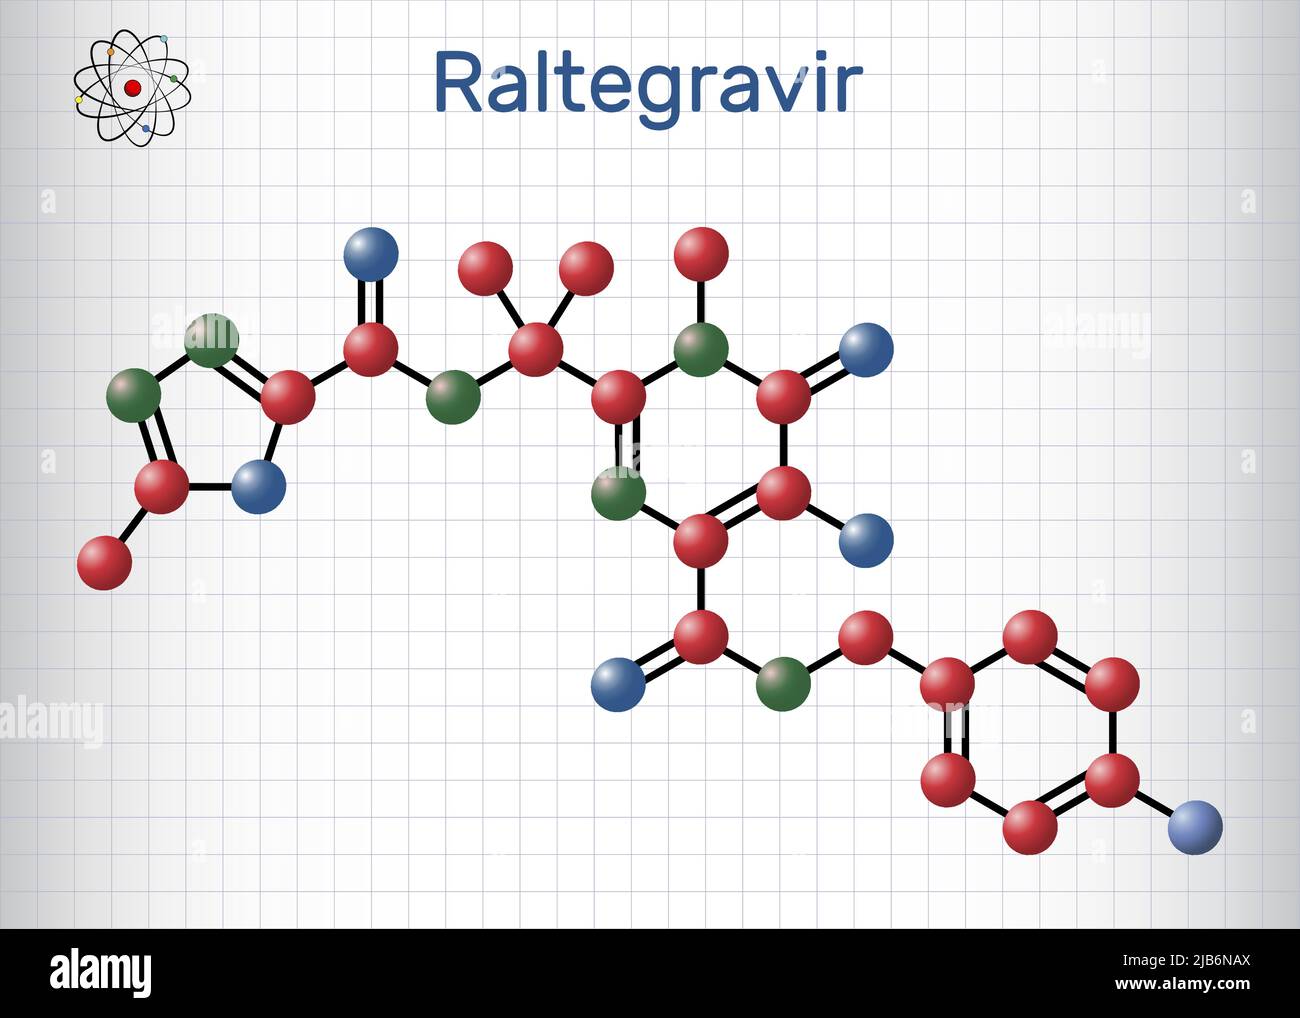 Raltegravir, RAL molecule. It is antiretroviral medication, used to treat HIV, AIDS. Molecule model. Sheet of paper in a cage.Vector illustration Stock Vector